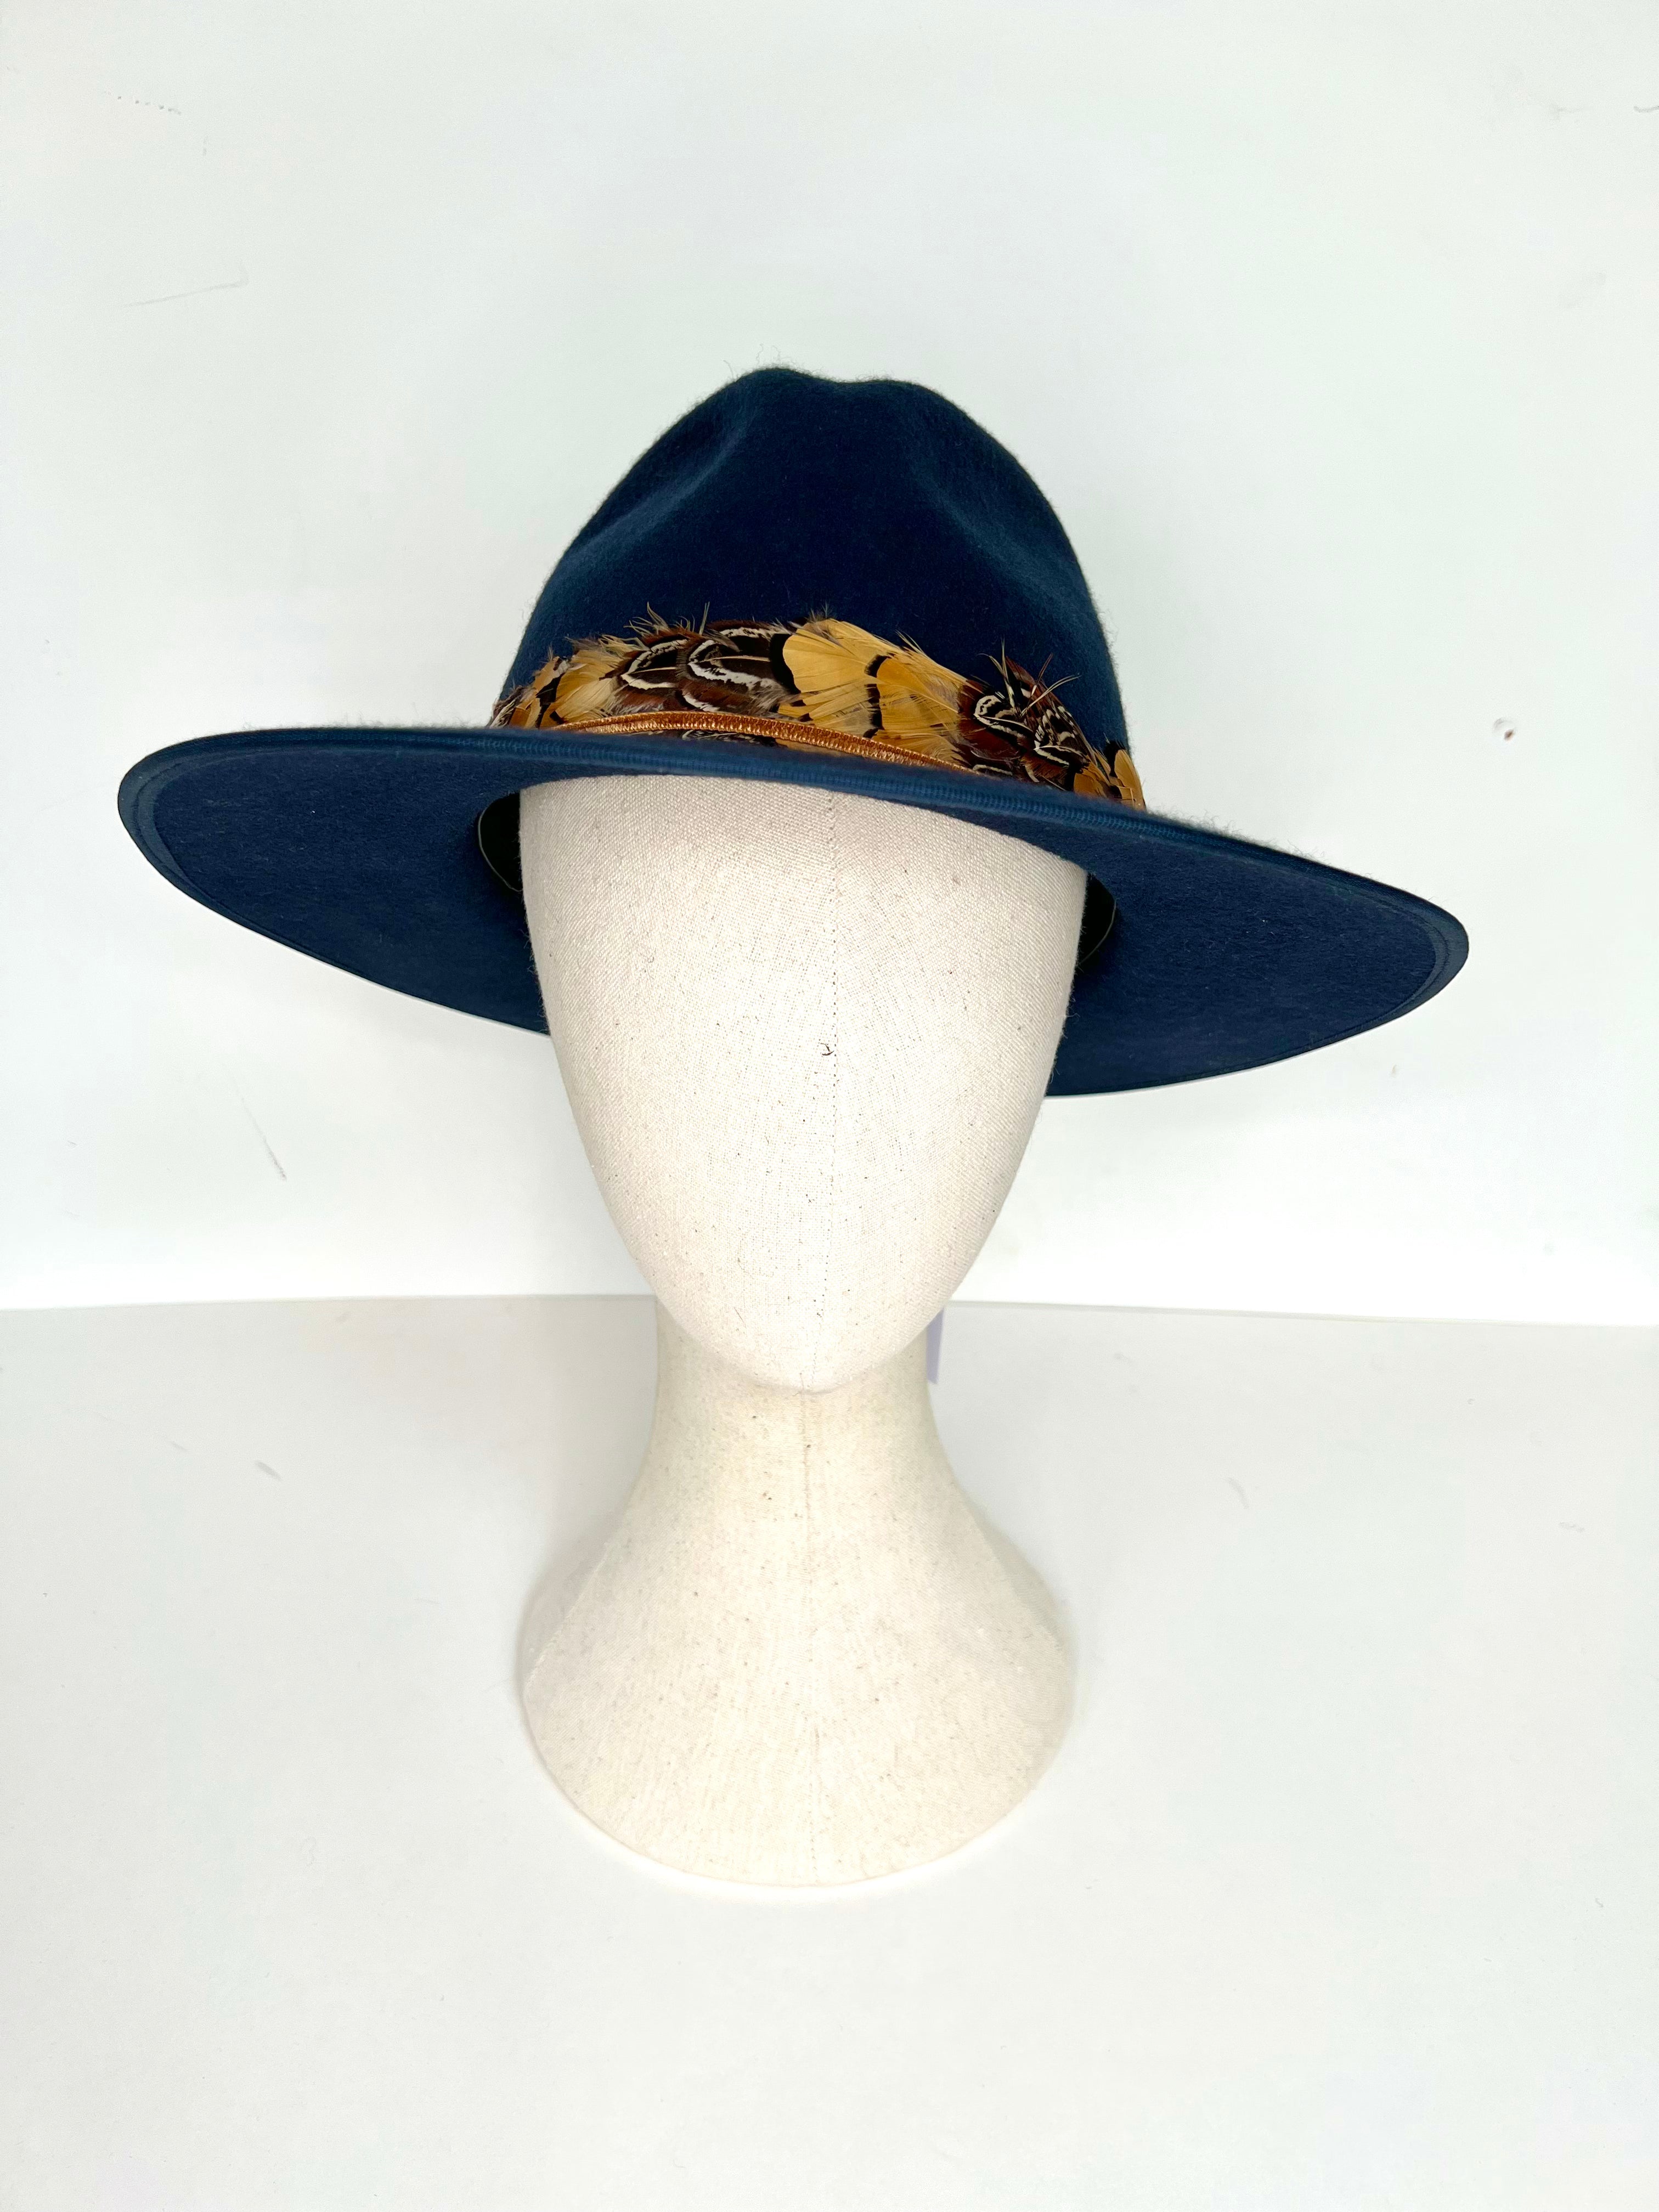 navy blue wool felt fedora with natural feather band